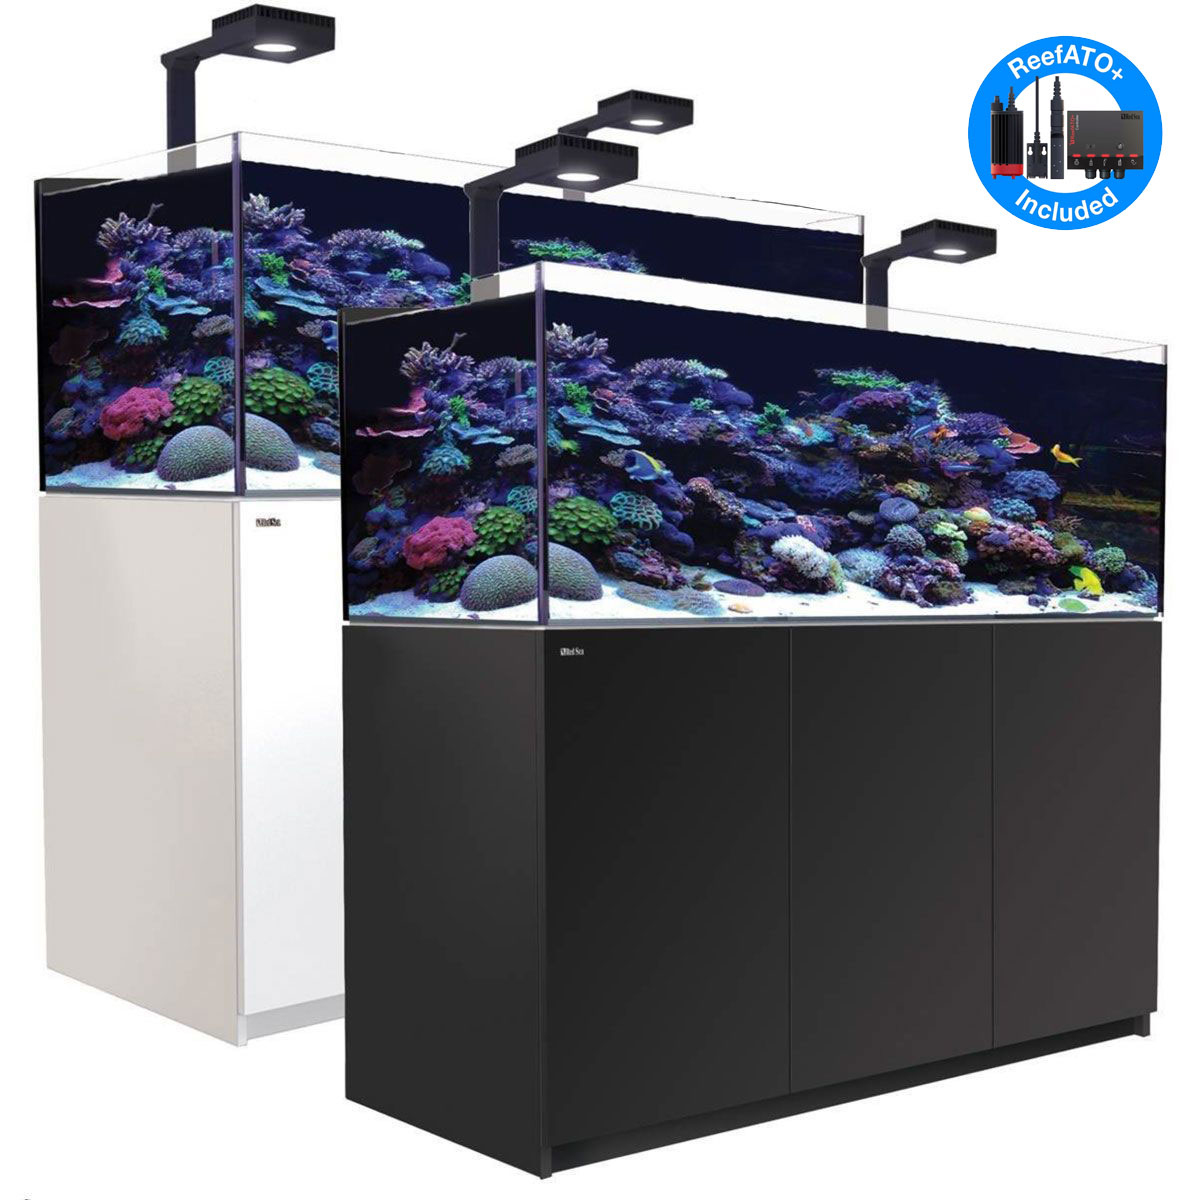 blok Arctic mammal Red Sea Reefer Deluxe XL 425 G2 System - 91 Gal w/ 2x ReefLED 160